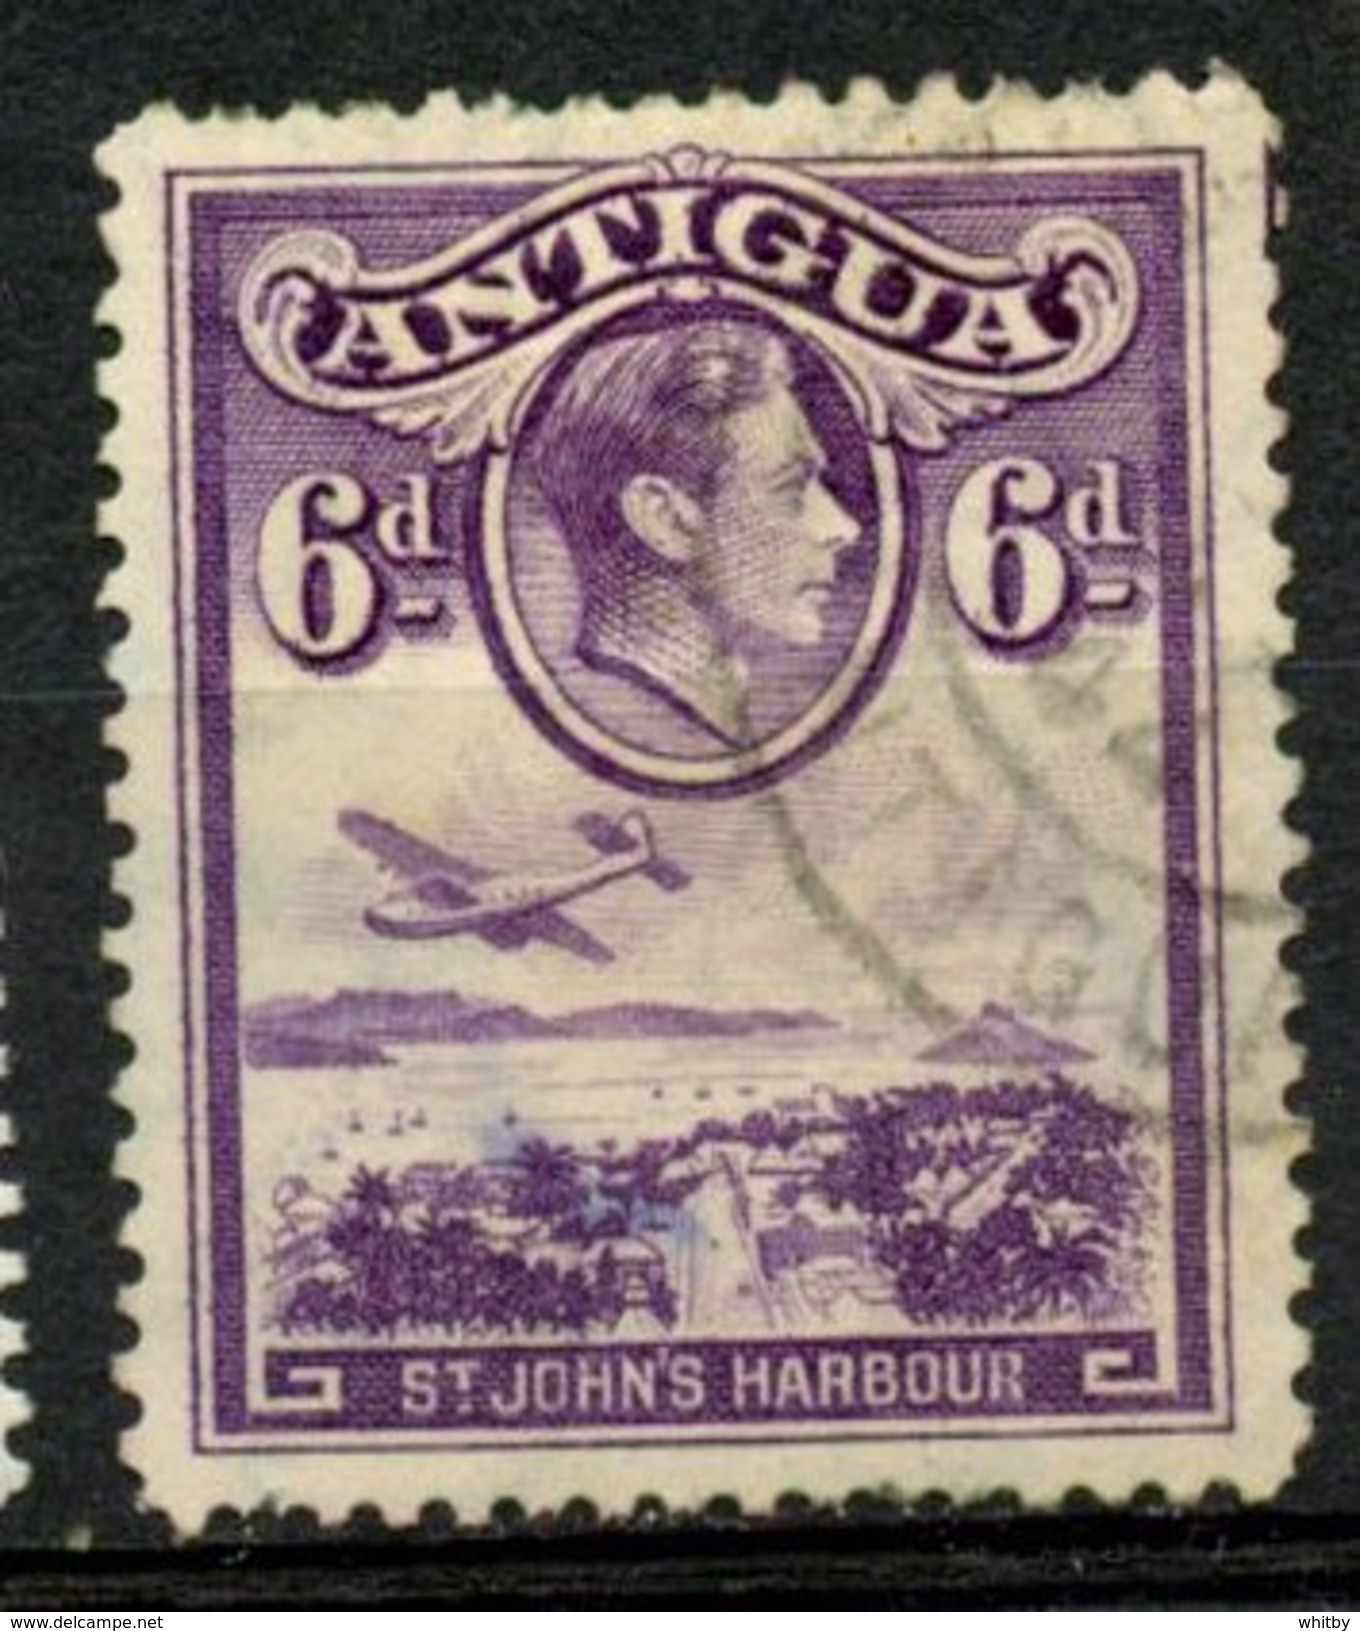 Antigua 1938 6p St. John's Harbour Issue #90  Used - 1858-1960 Crown Colony